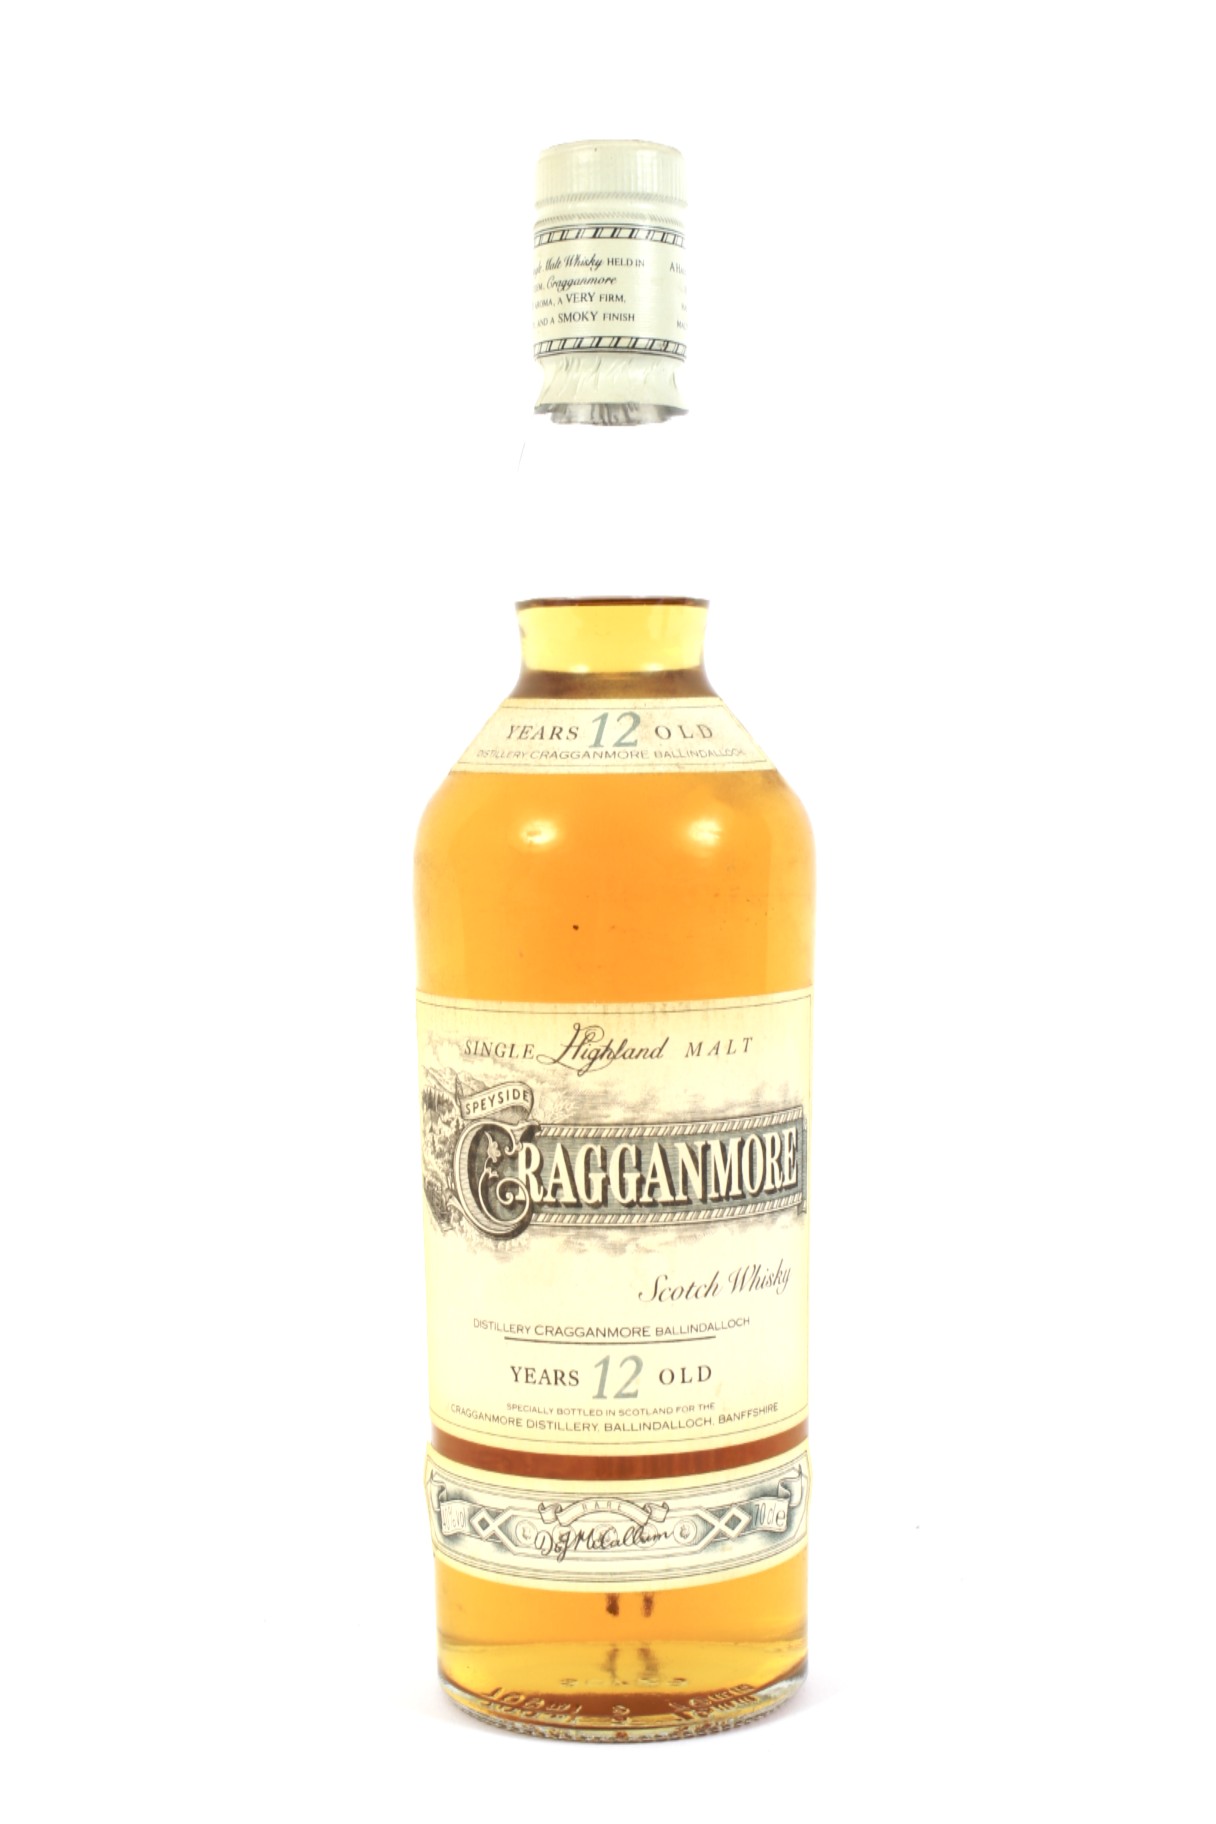 A bottle of Cragganmore 12 year old single malt whisky.